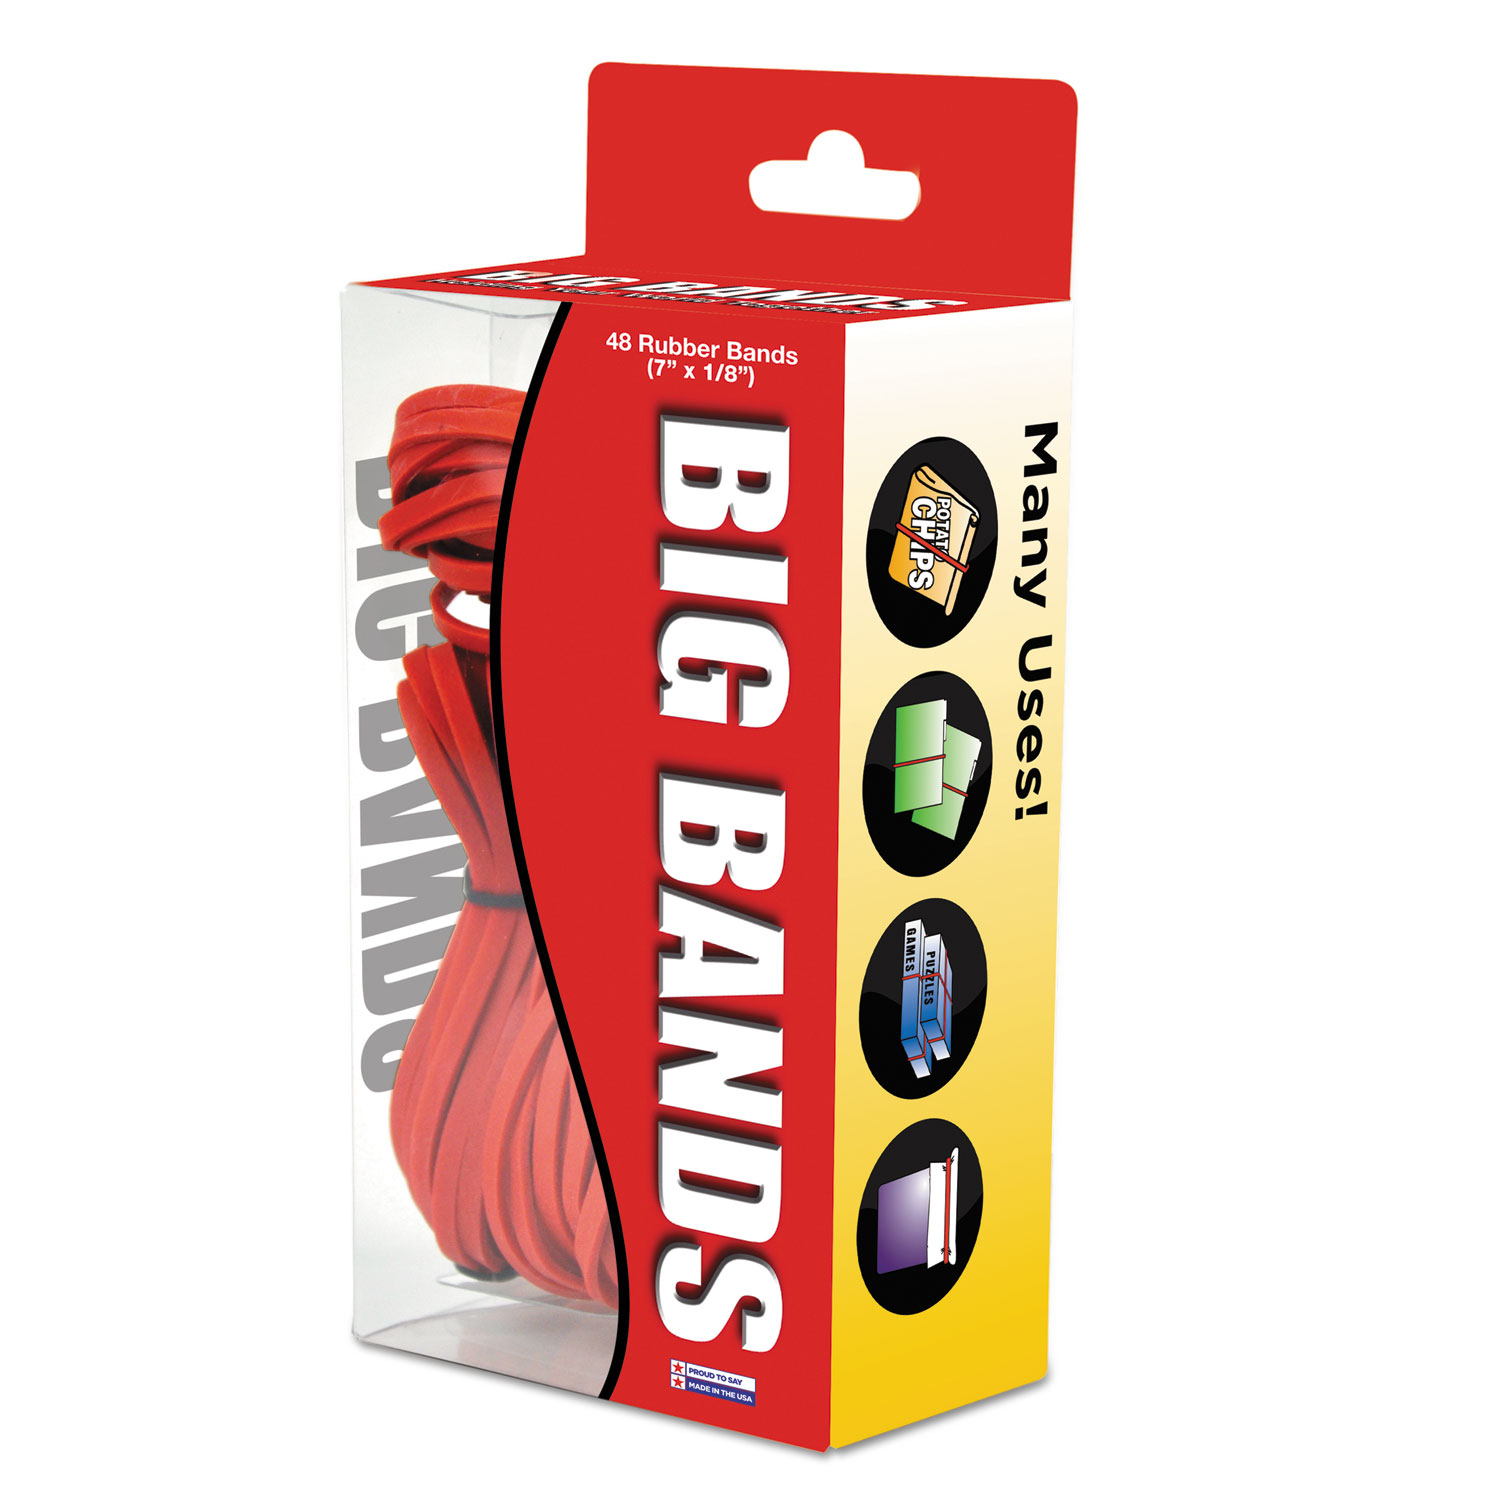  Alliance 00699 Big Bands Rubber Bands, Size 117B, 0.07 Gauge, Red, 48/Box (ALL00699) 